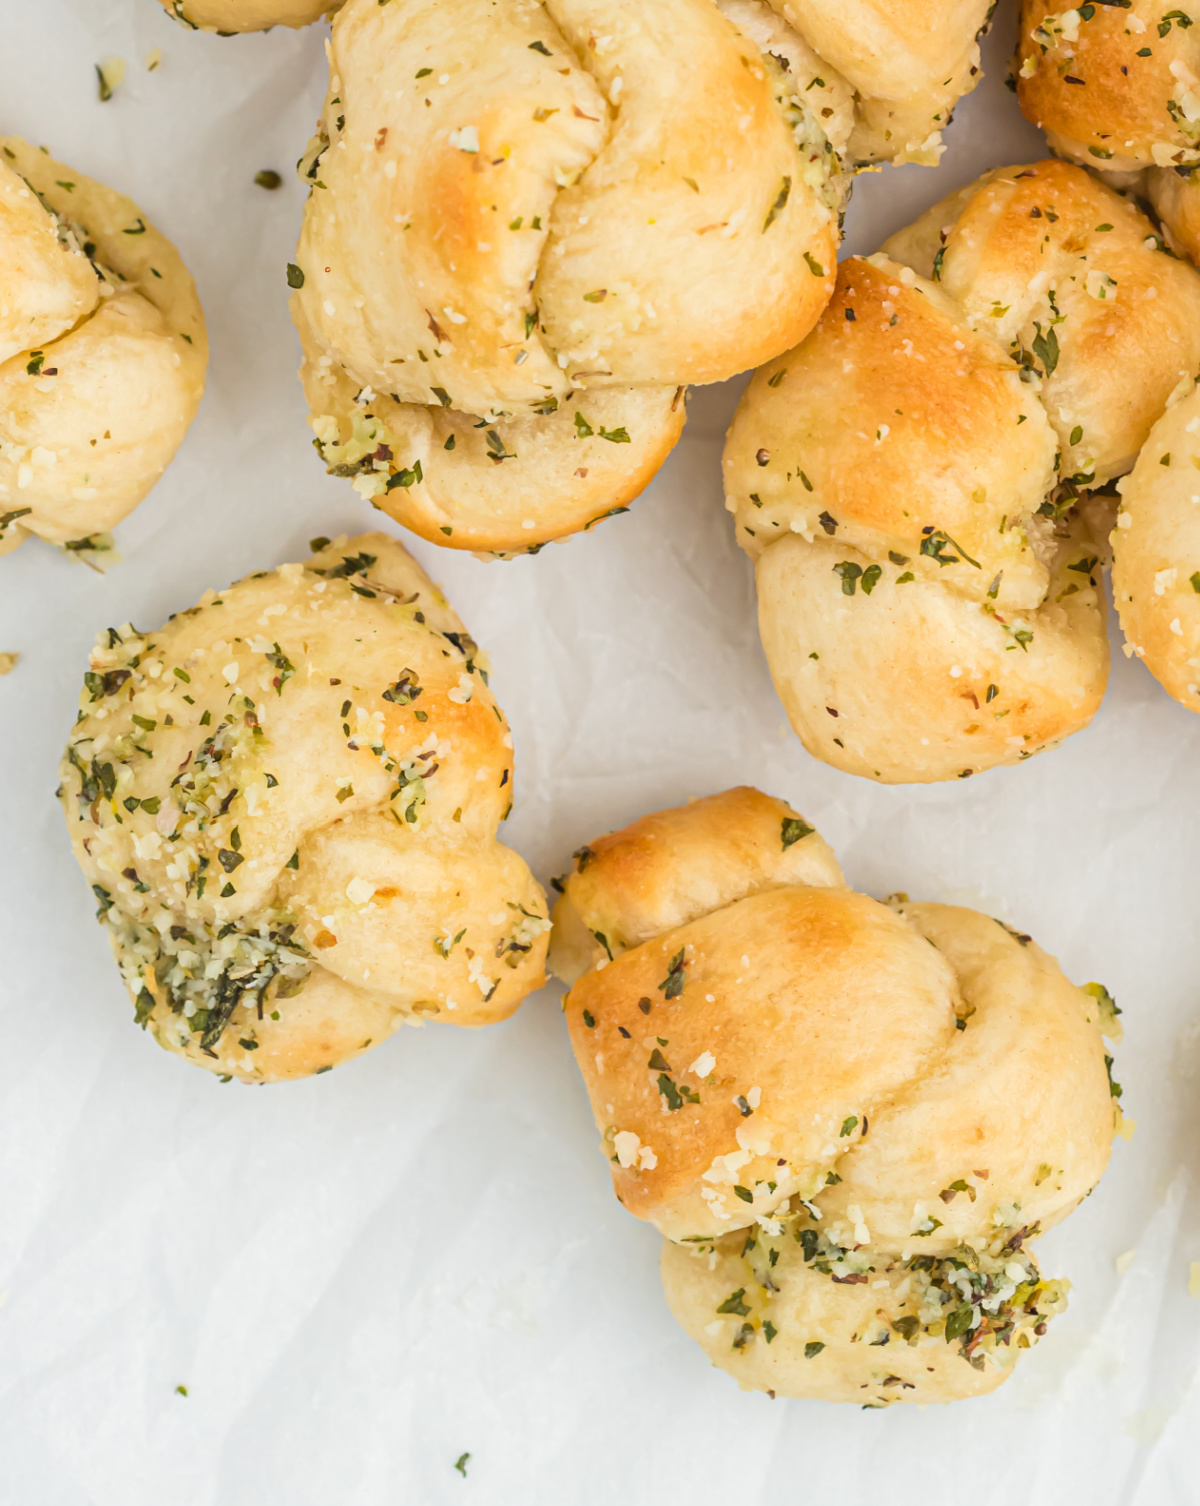 new york style garlic knots made with real garlic and premade pizza dough